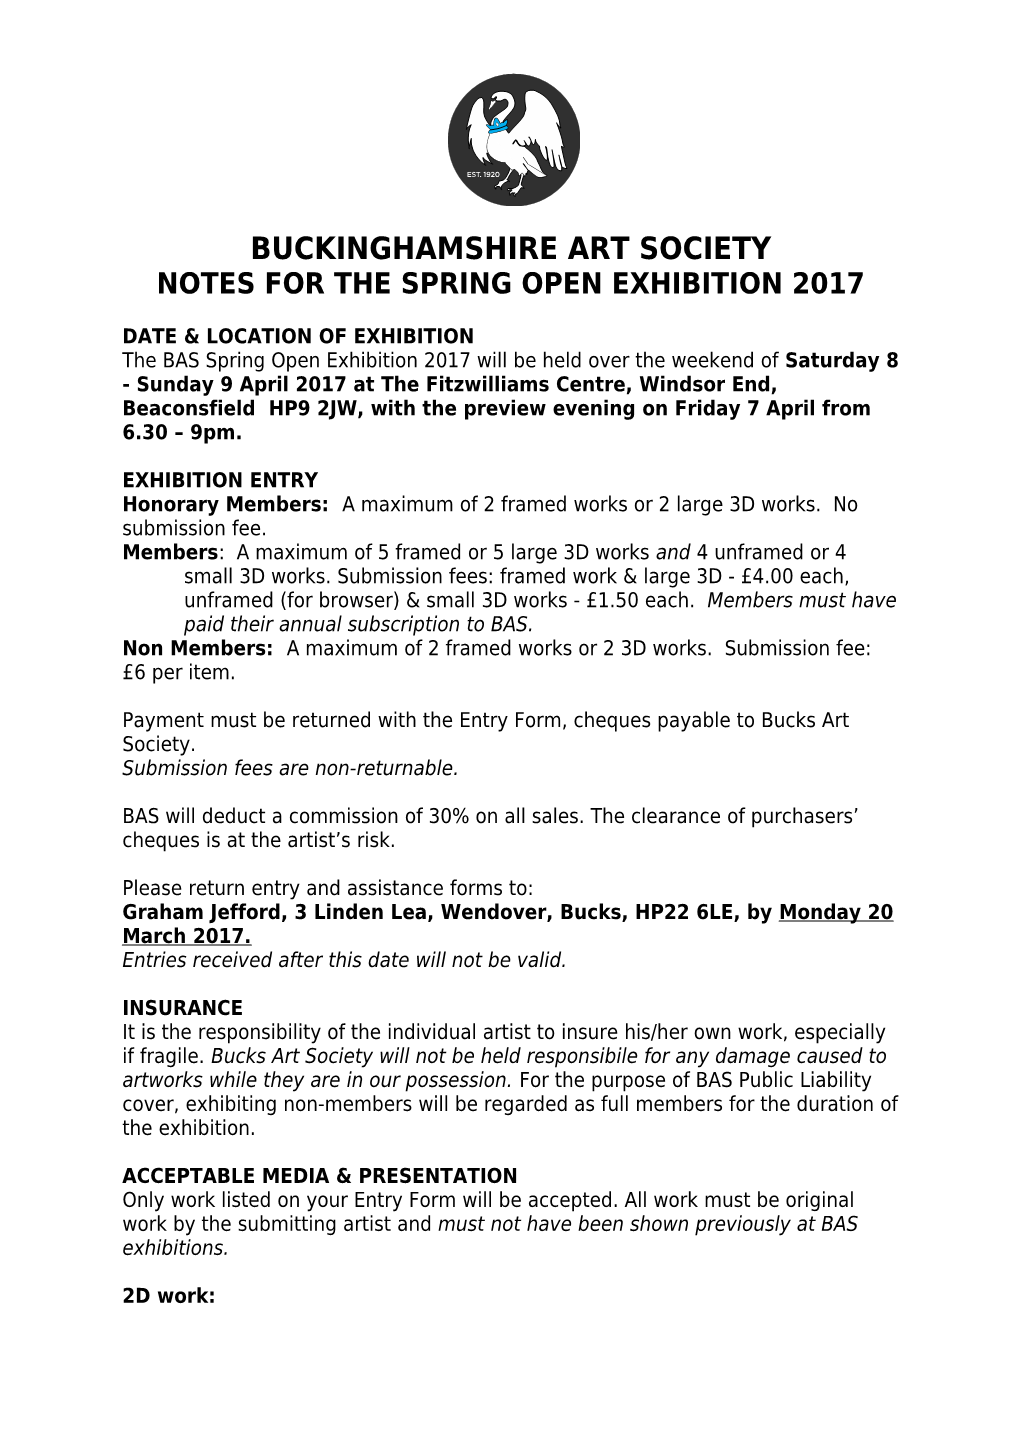 Notes for the Spring Open Exhibition 2017